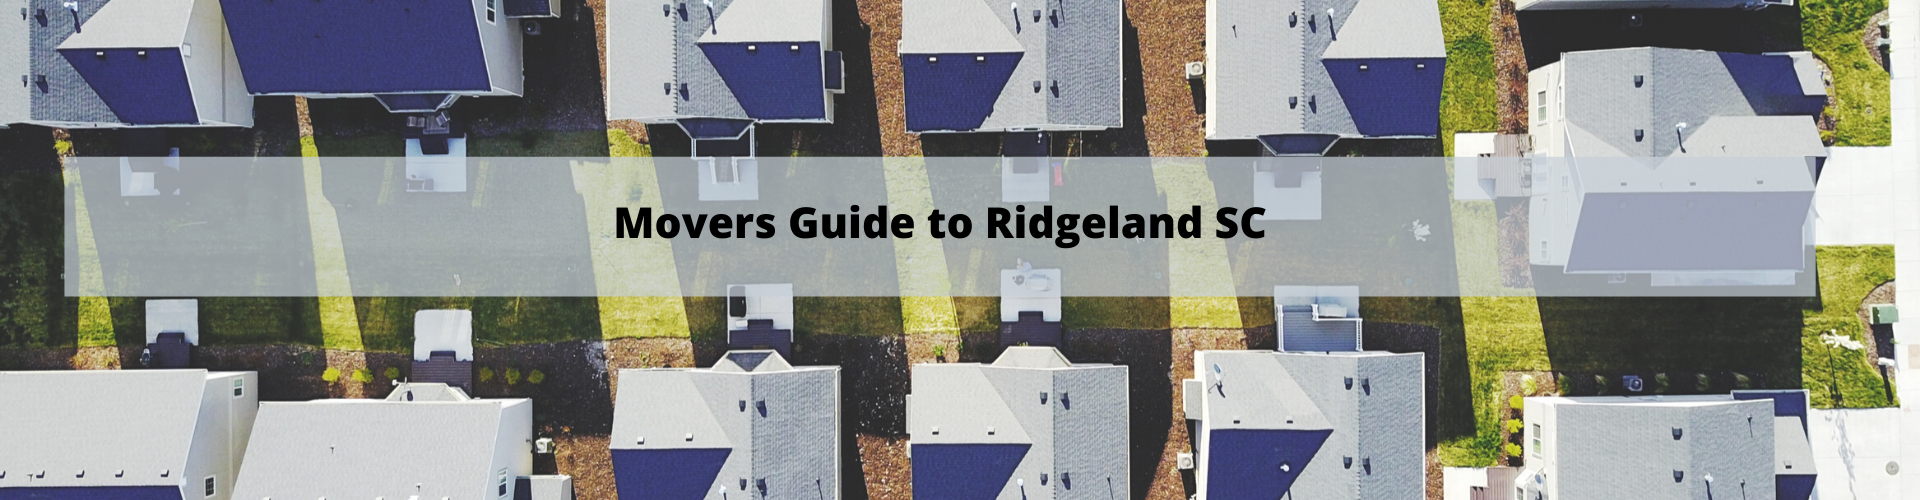 Movers Guide to Ridgeland SC